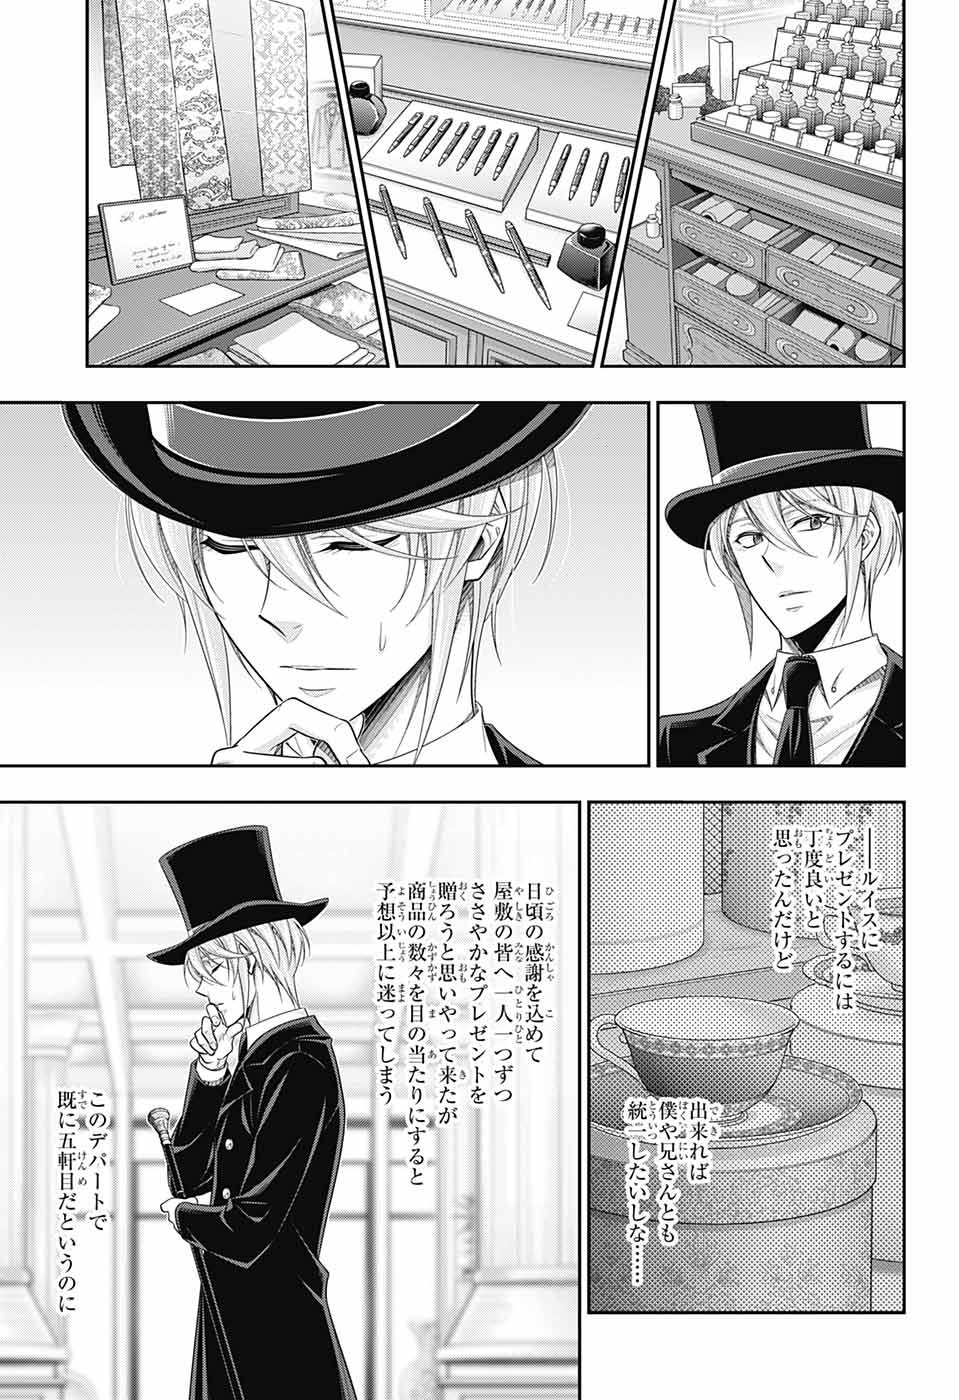 Yuukoku no Moriarty: The Remains - Chapter 05 - Page 5